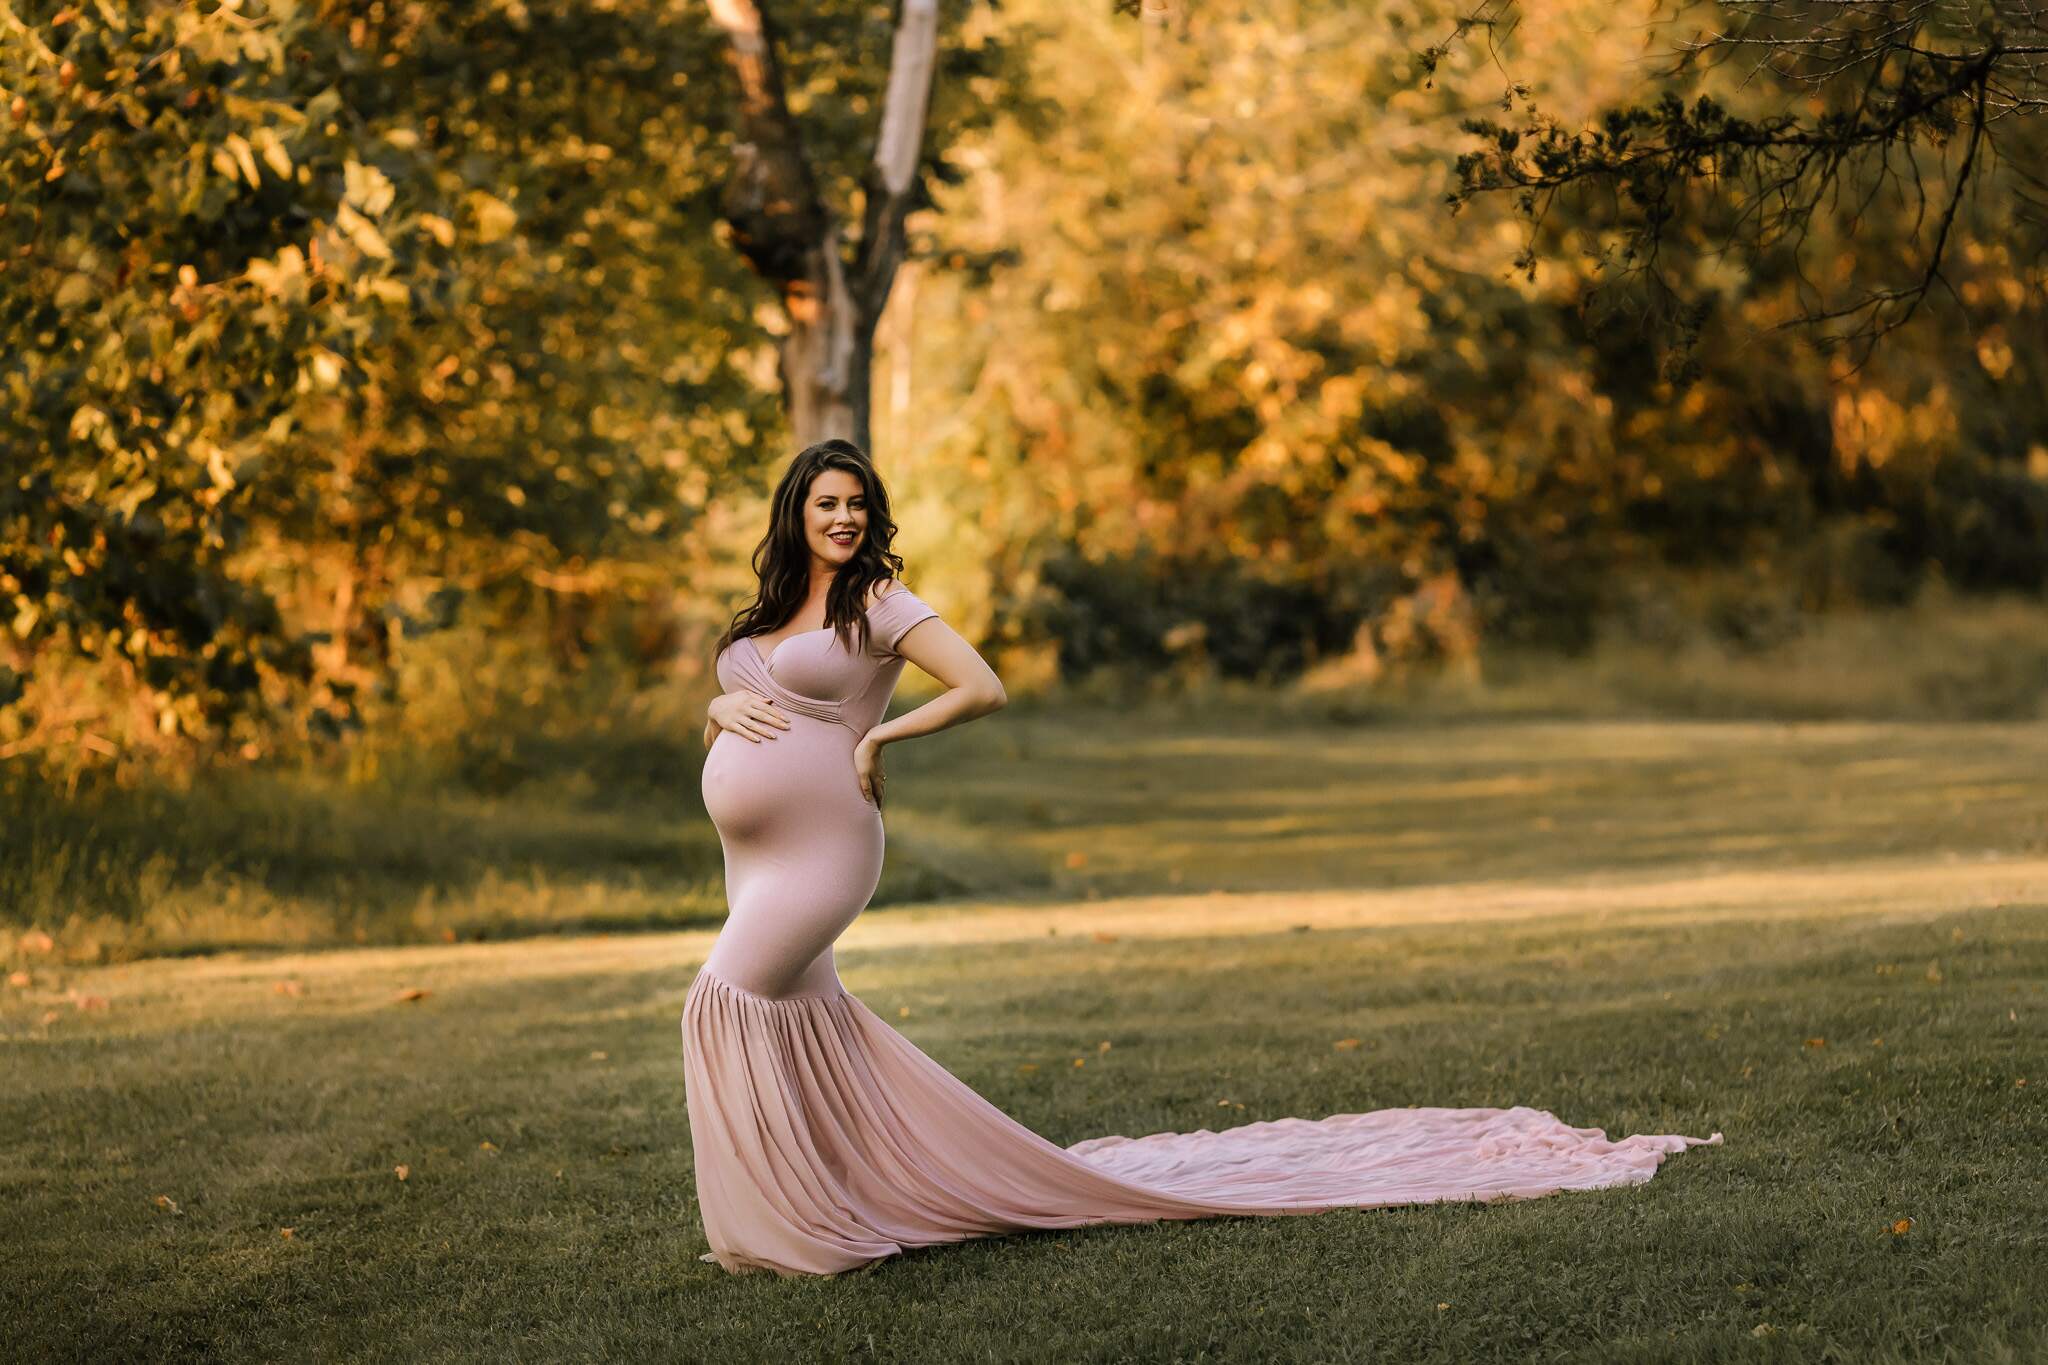 Outdoor maternity photoshoot with dramatic sunset and gowns in Pennsylvania.